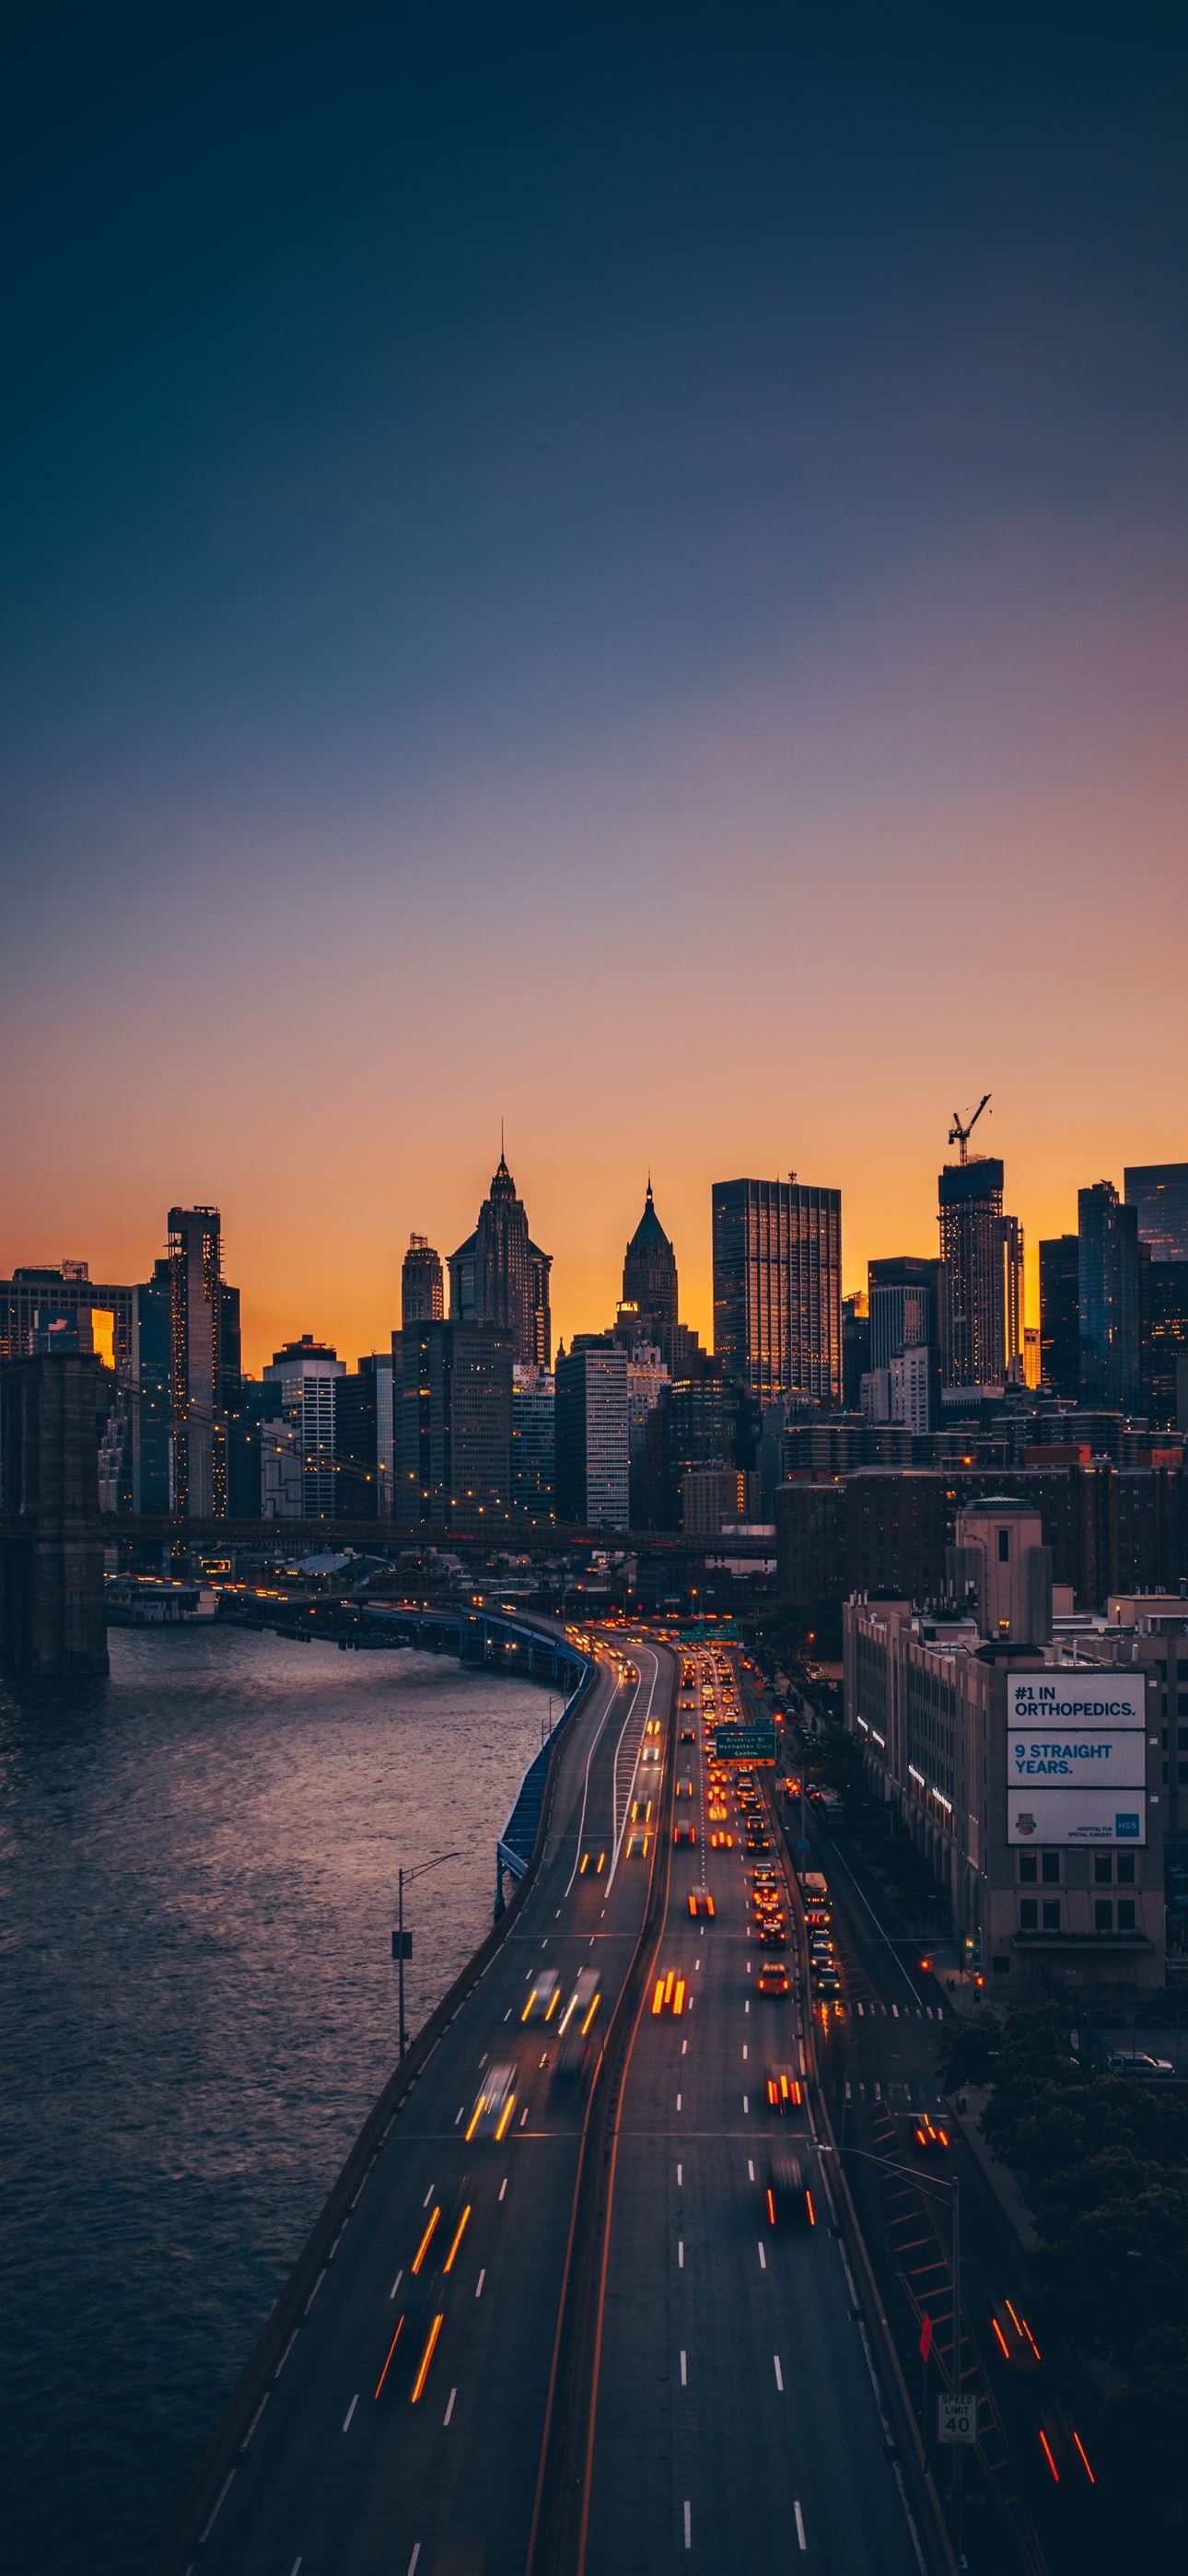 A city skyline at sunset with traffic - New York